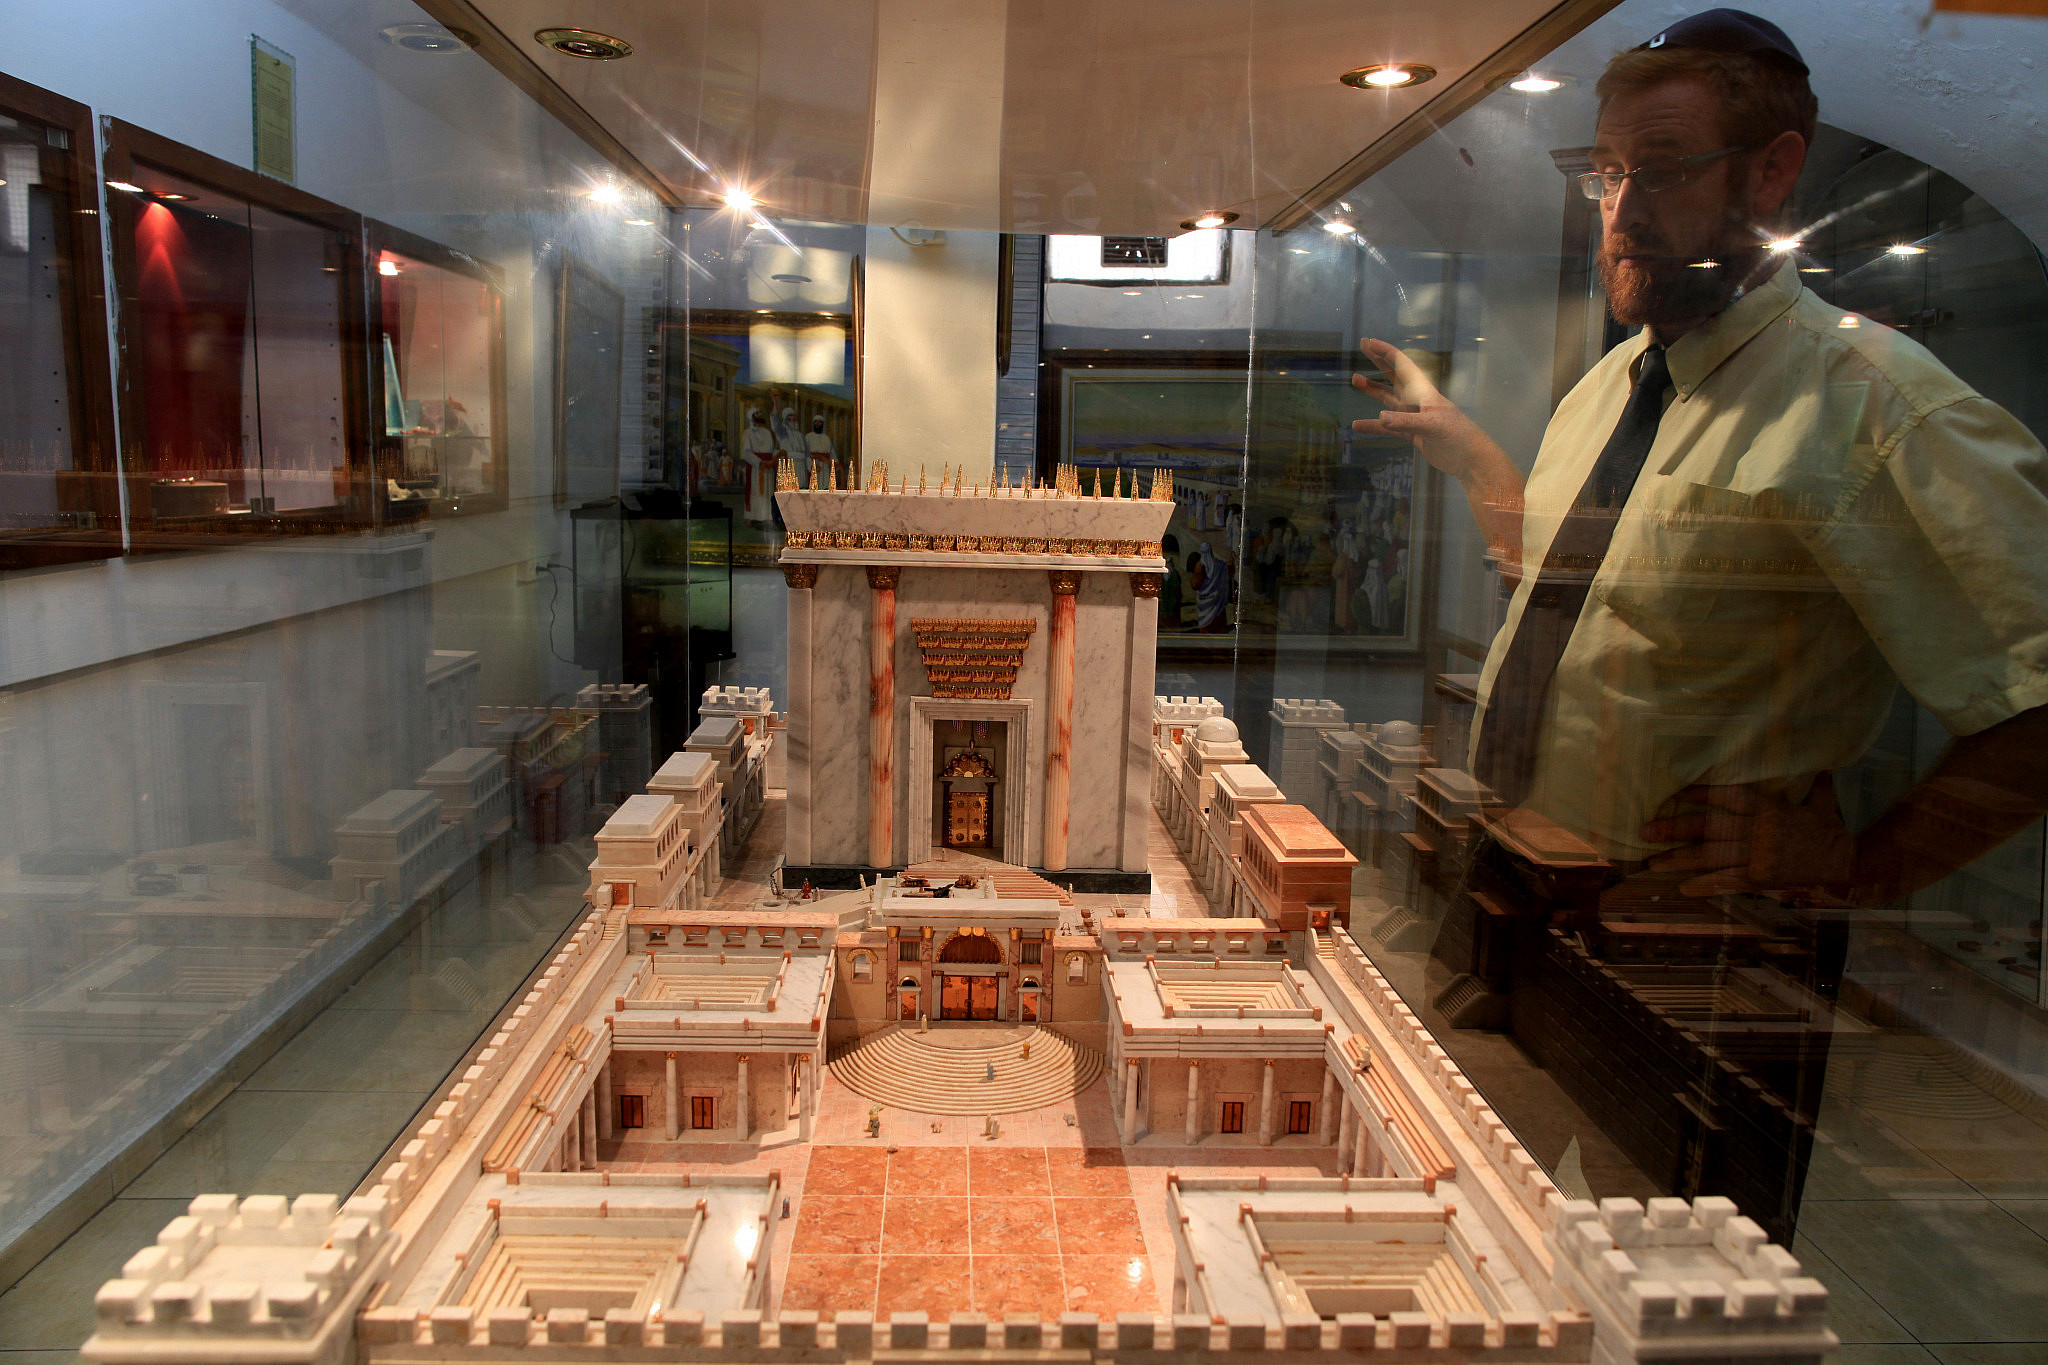 Yehuda Glick, working at the Temple Institute in Jerusalem's Old City, watches a model of the Holy Temple on display, August 11, 2009. (Nati Shohat/Flash90)